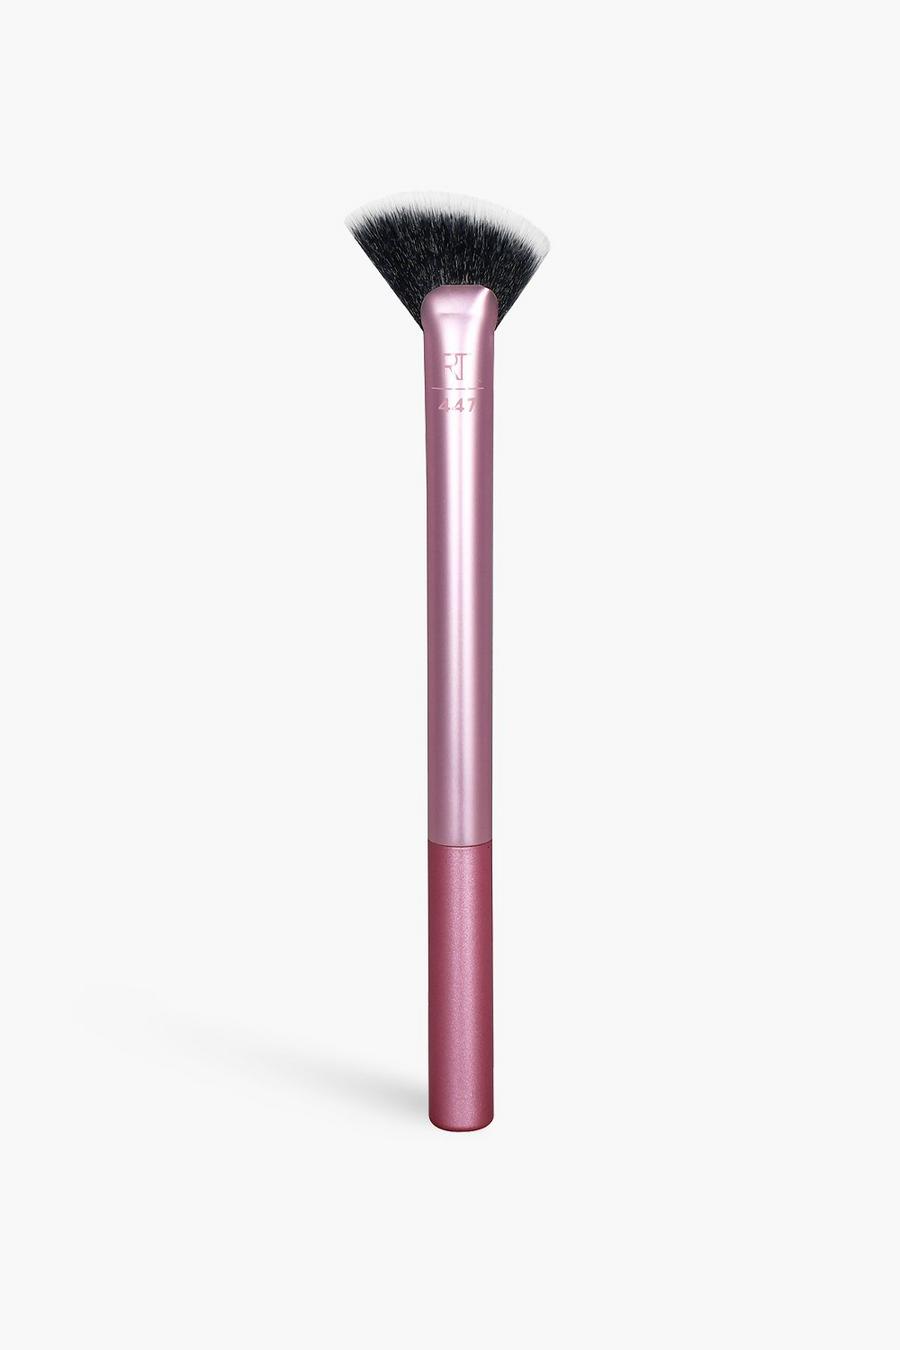 Rose gold metallizzato REAL TECHNIQUES RADIANCE FAN MAKEUP BRUSH